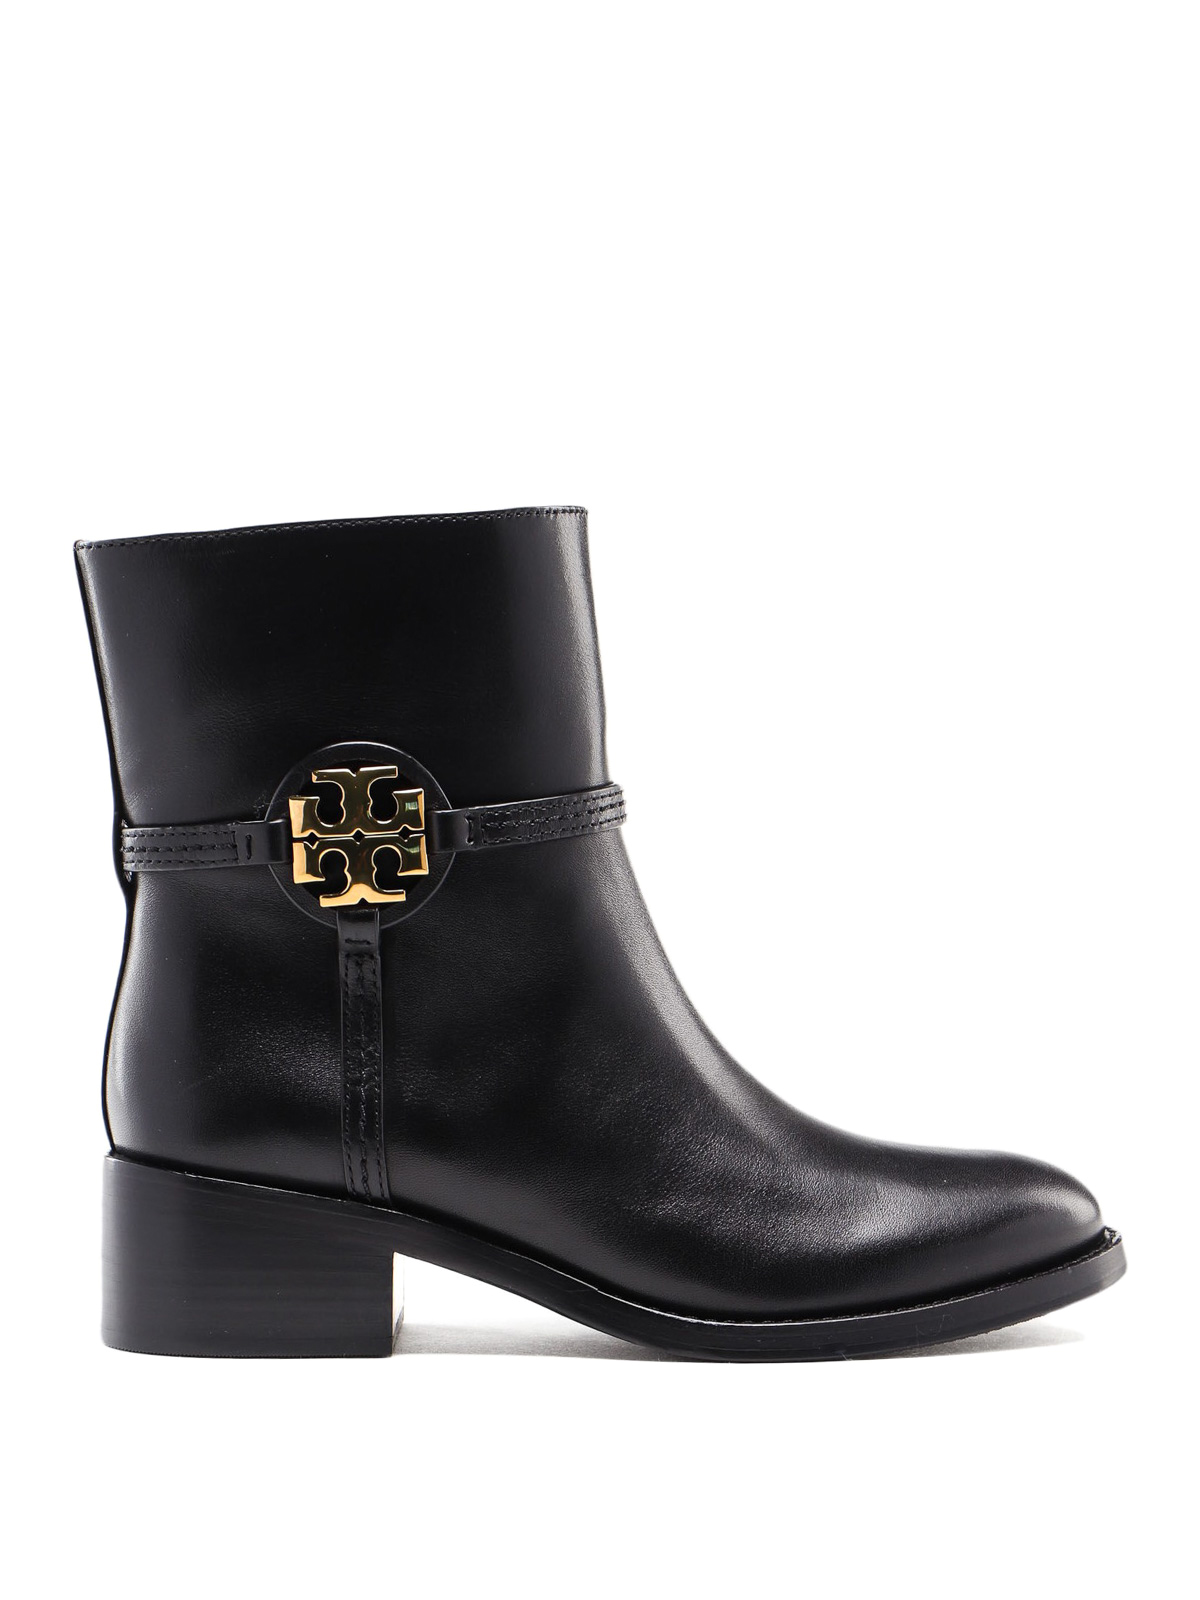 Ankle boots Tory Burch - Miller golden logo ankle boots - 61151006